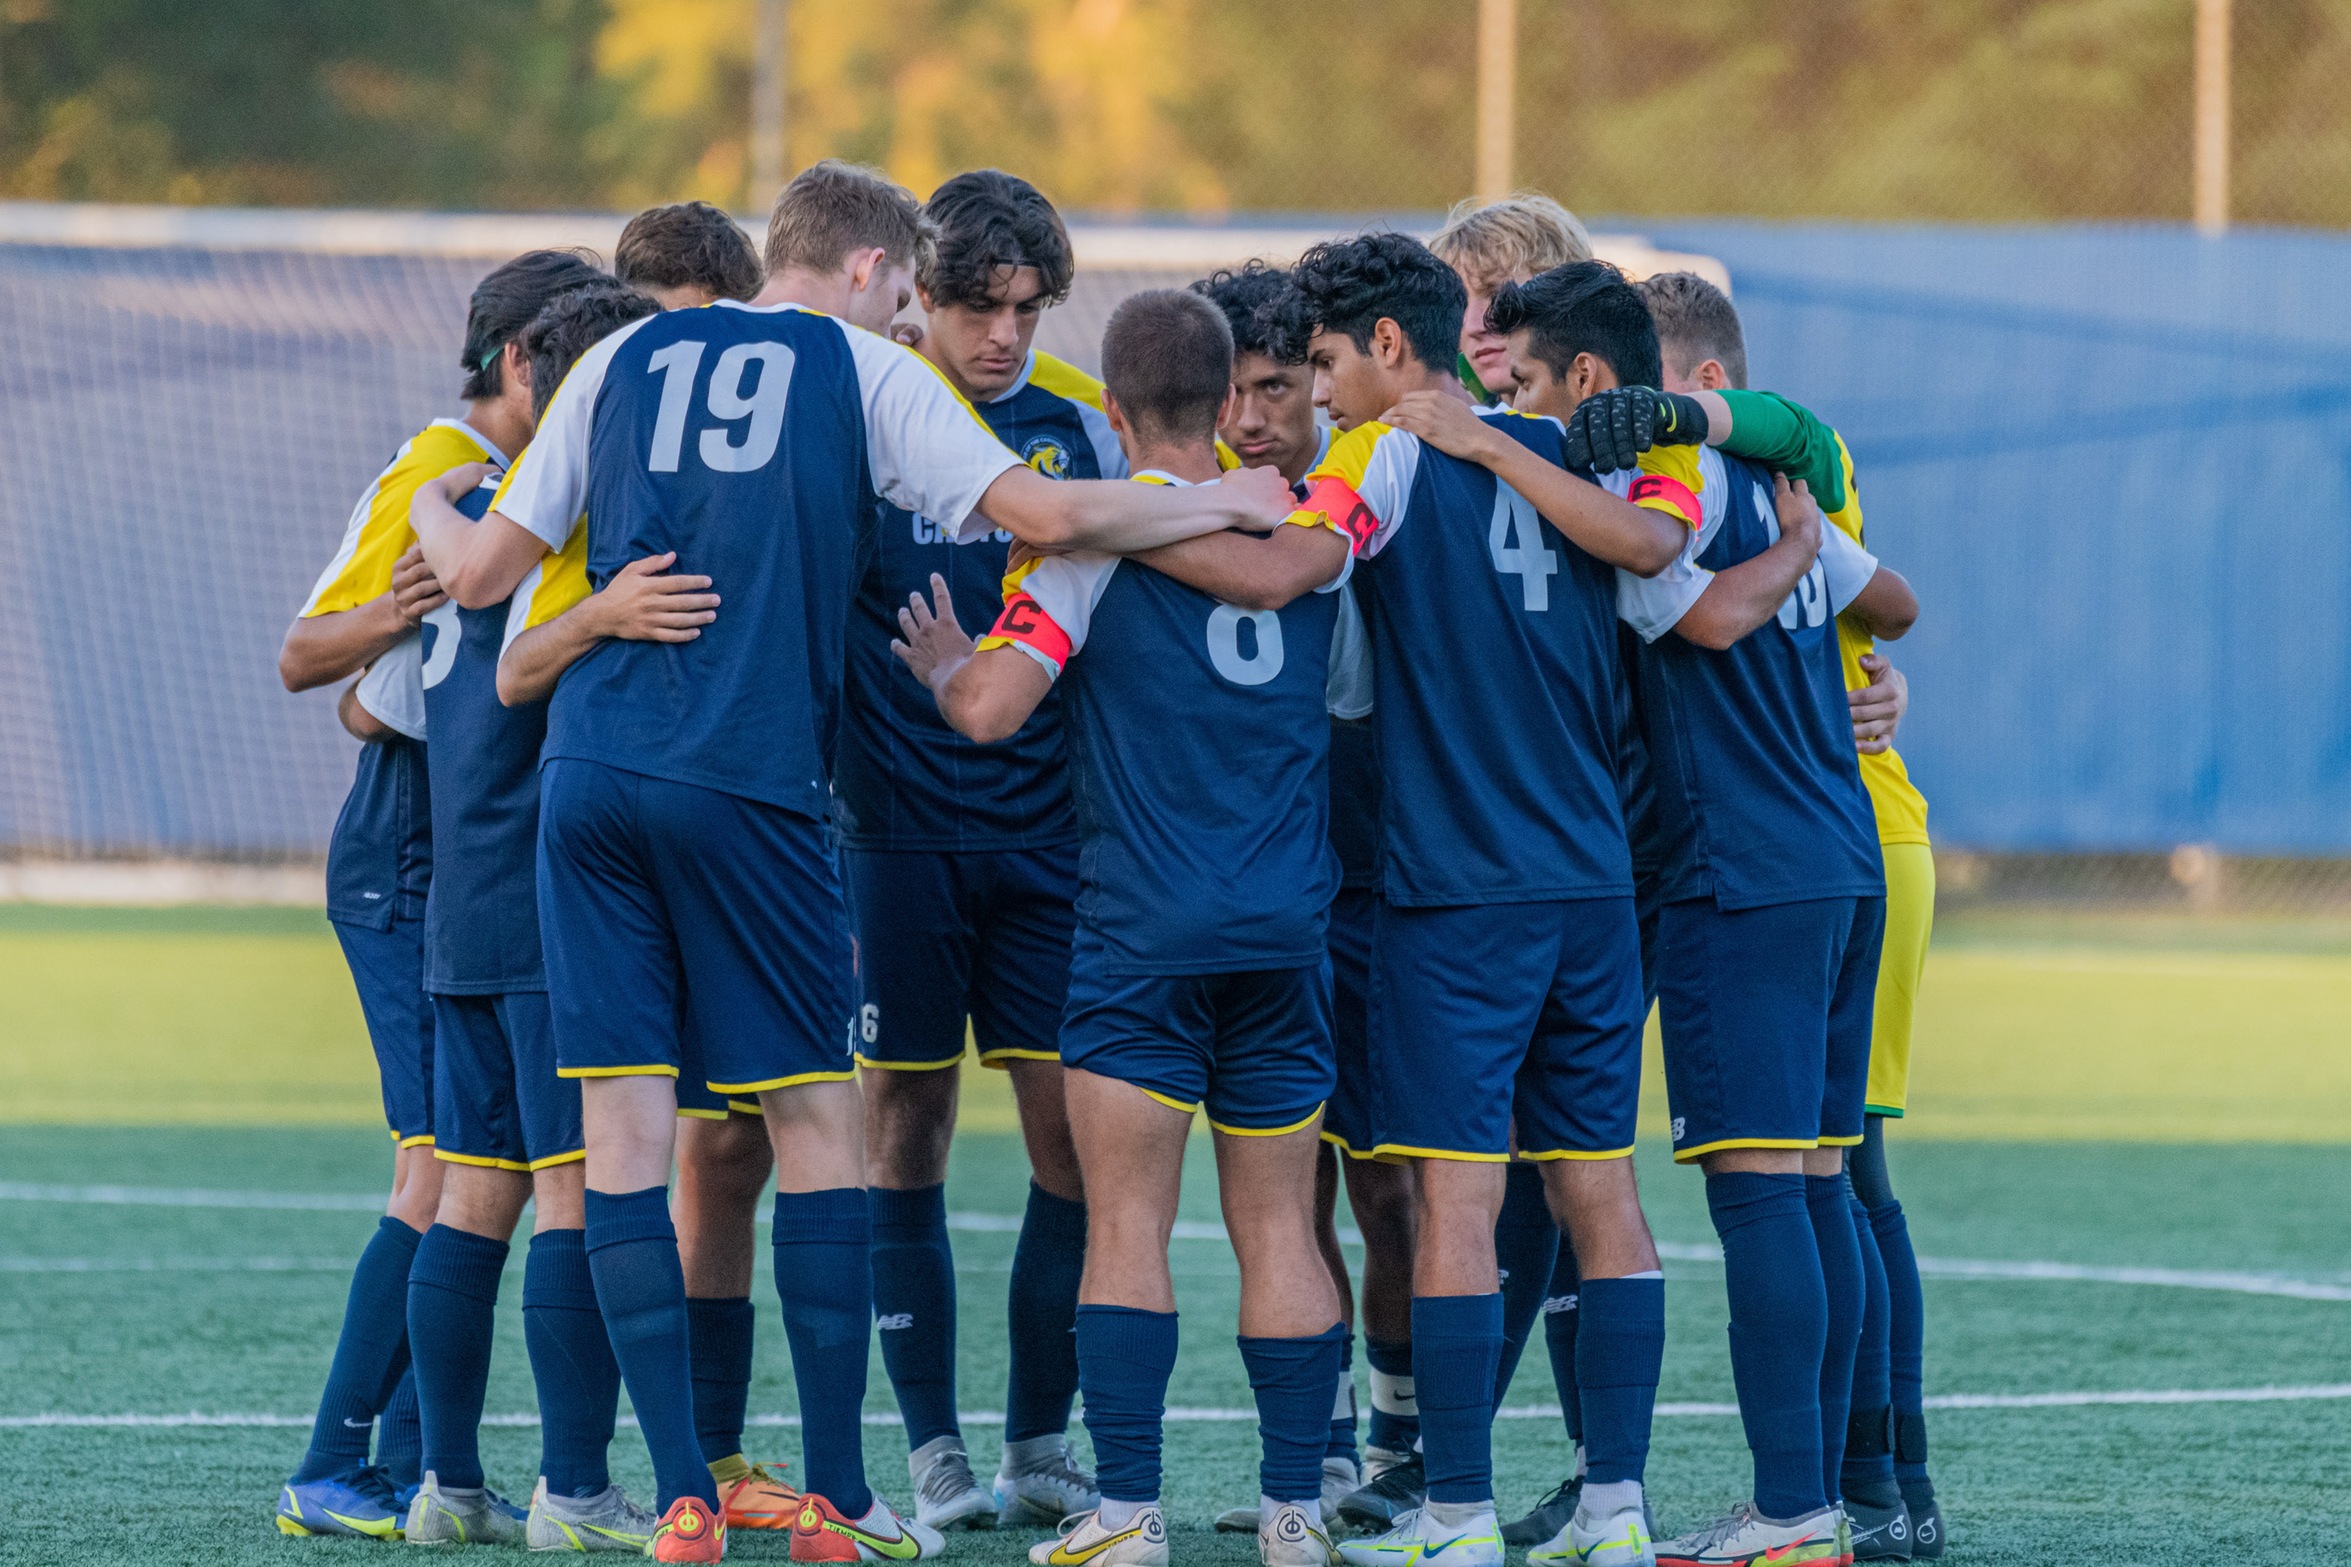 College of the Canyons men's soccer stock image.